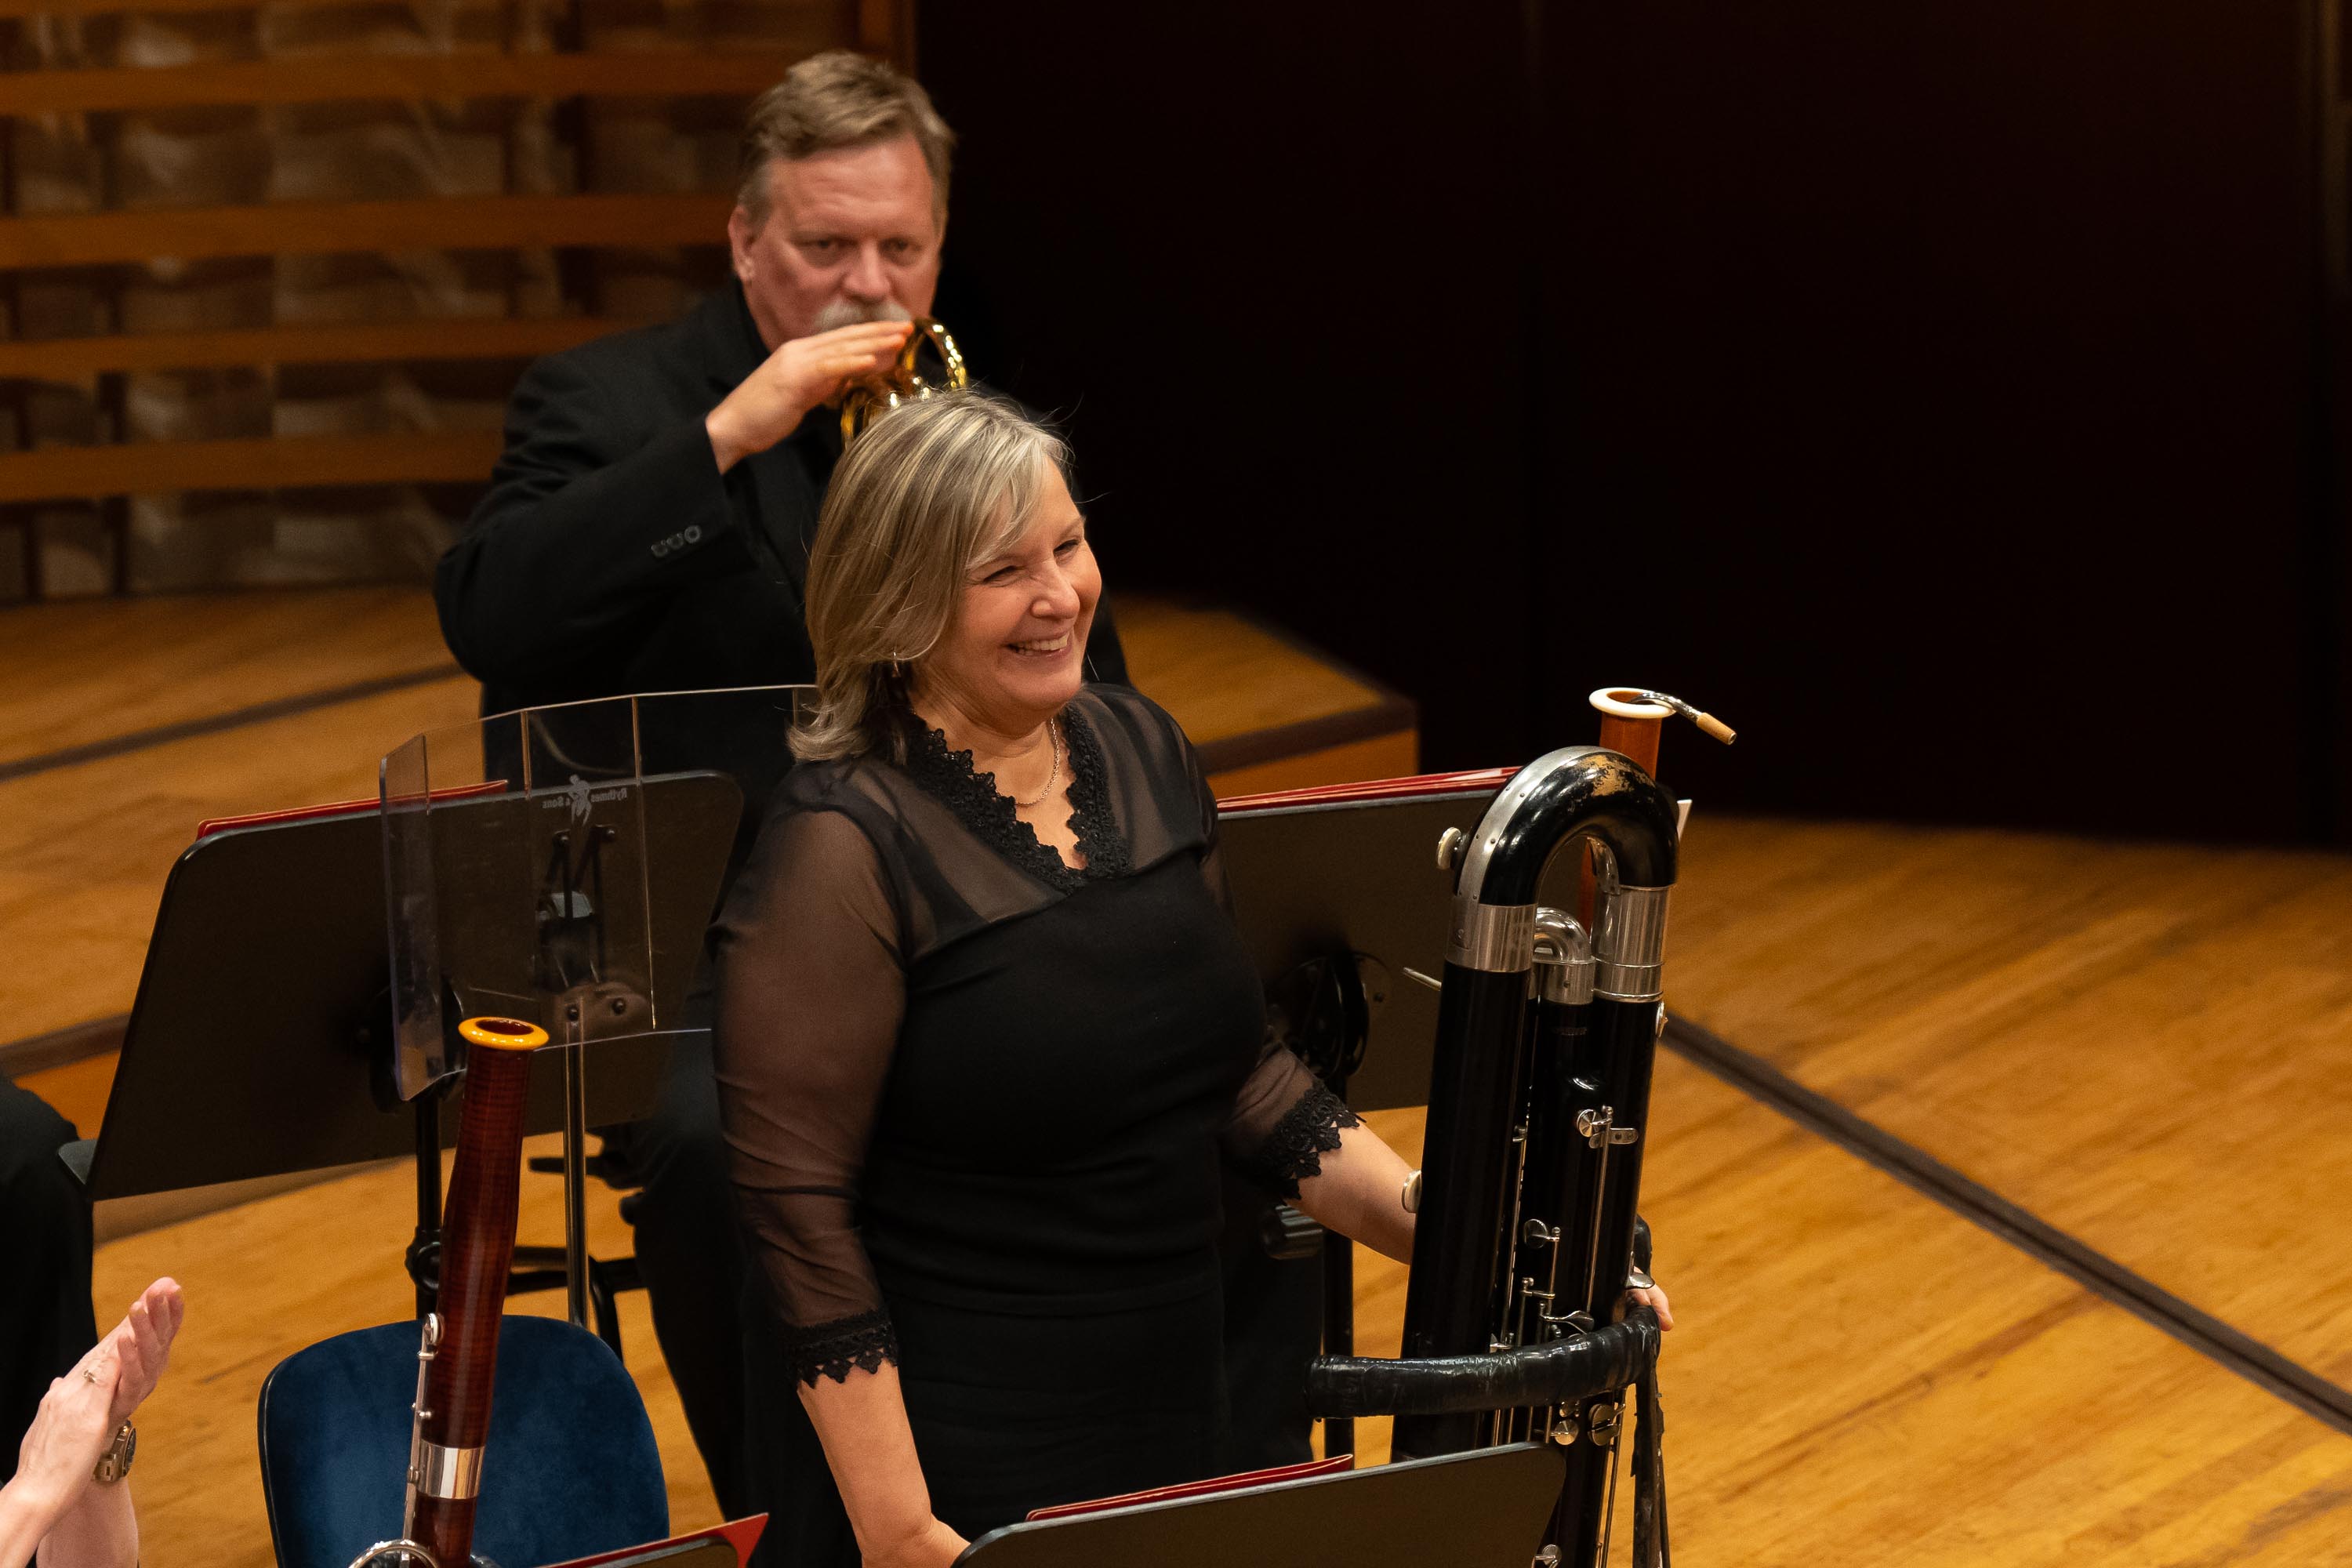 Contrabassoon player Holly Blake also takes a solo bow